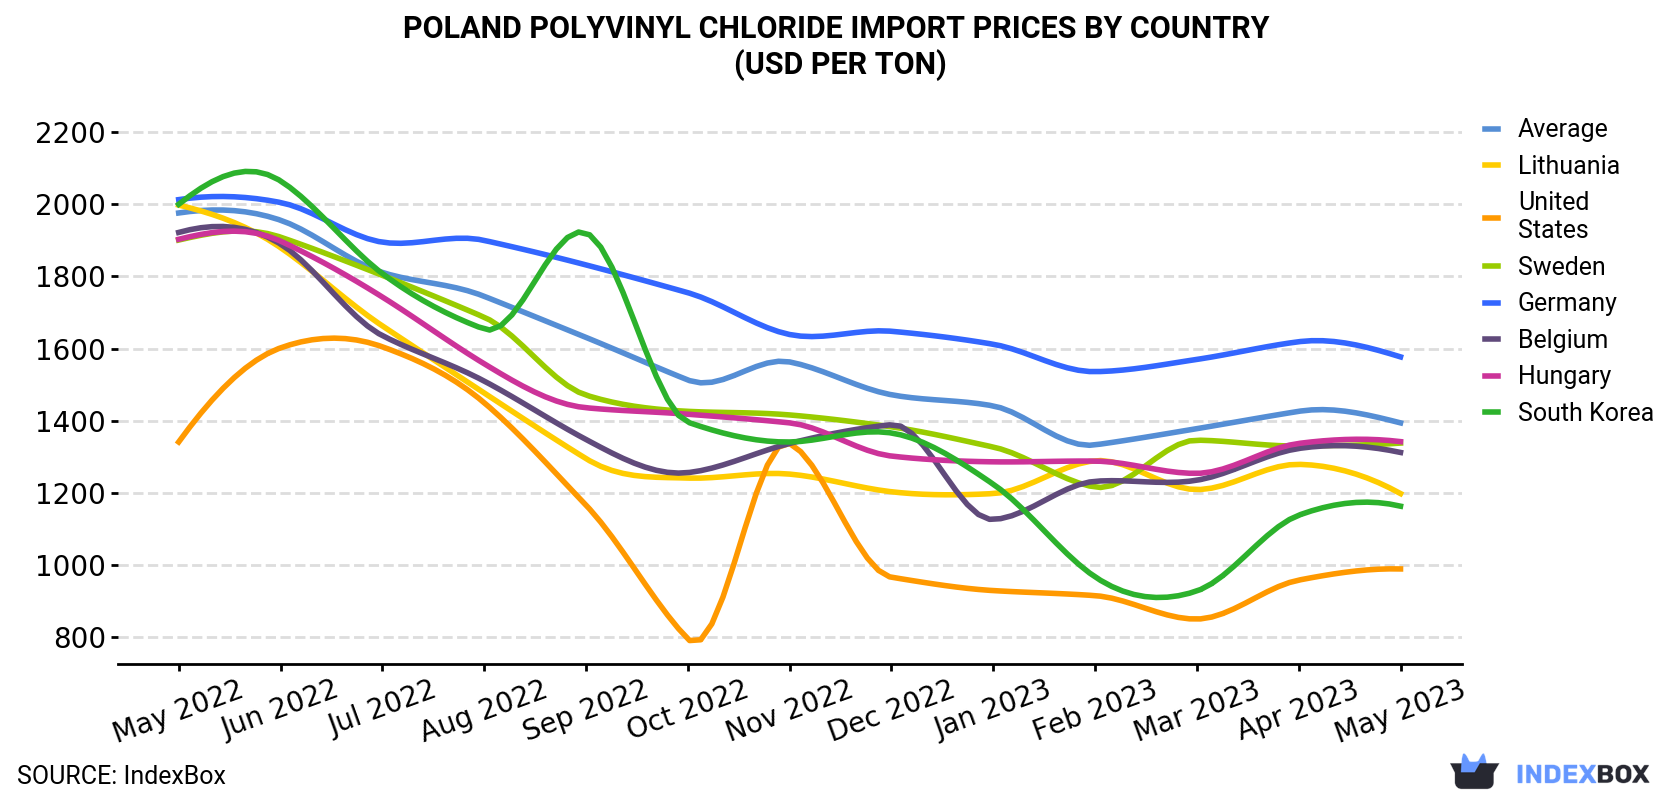 Poland Polyvinyl Chloride Import Prices By Country (USD Per Ton)